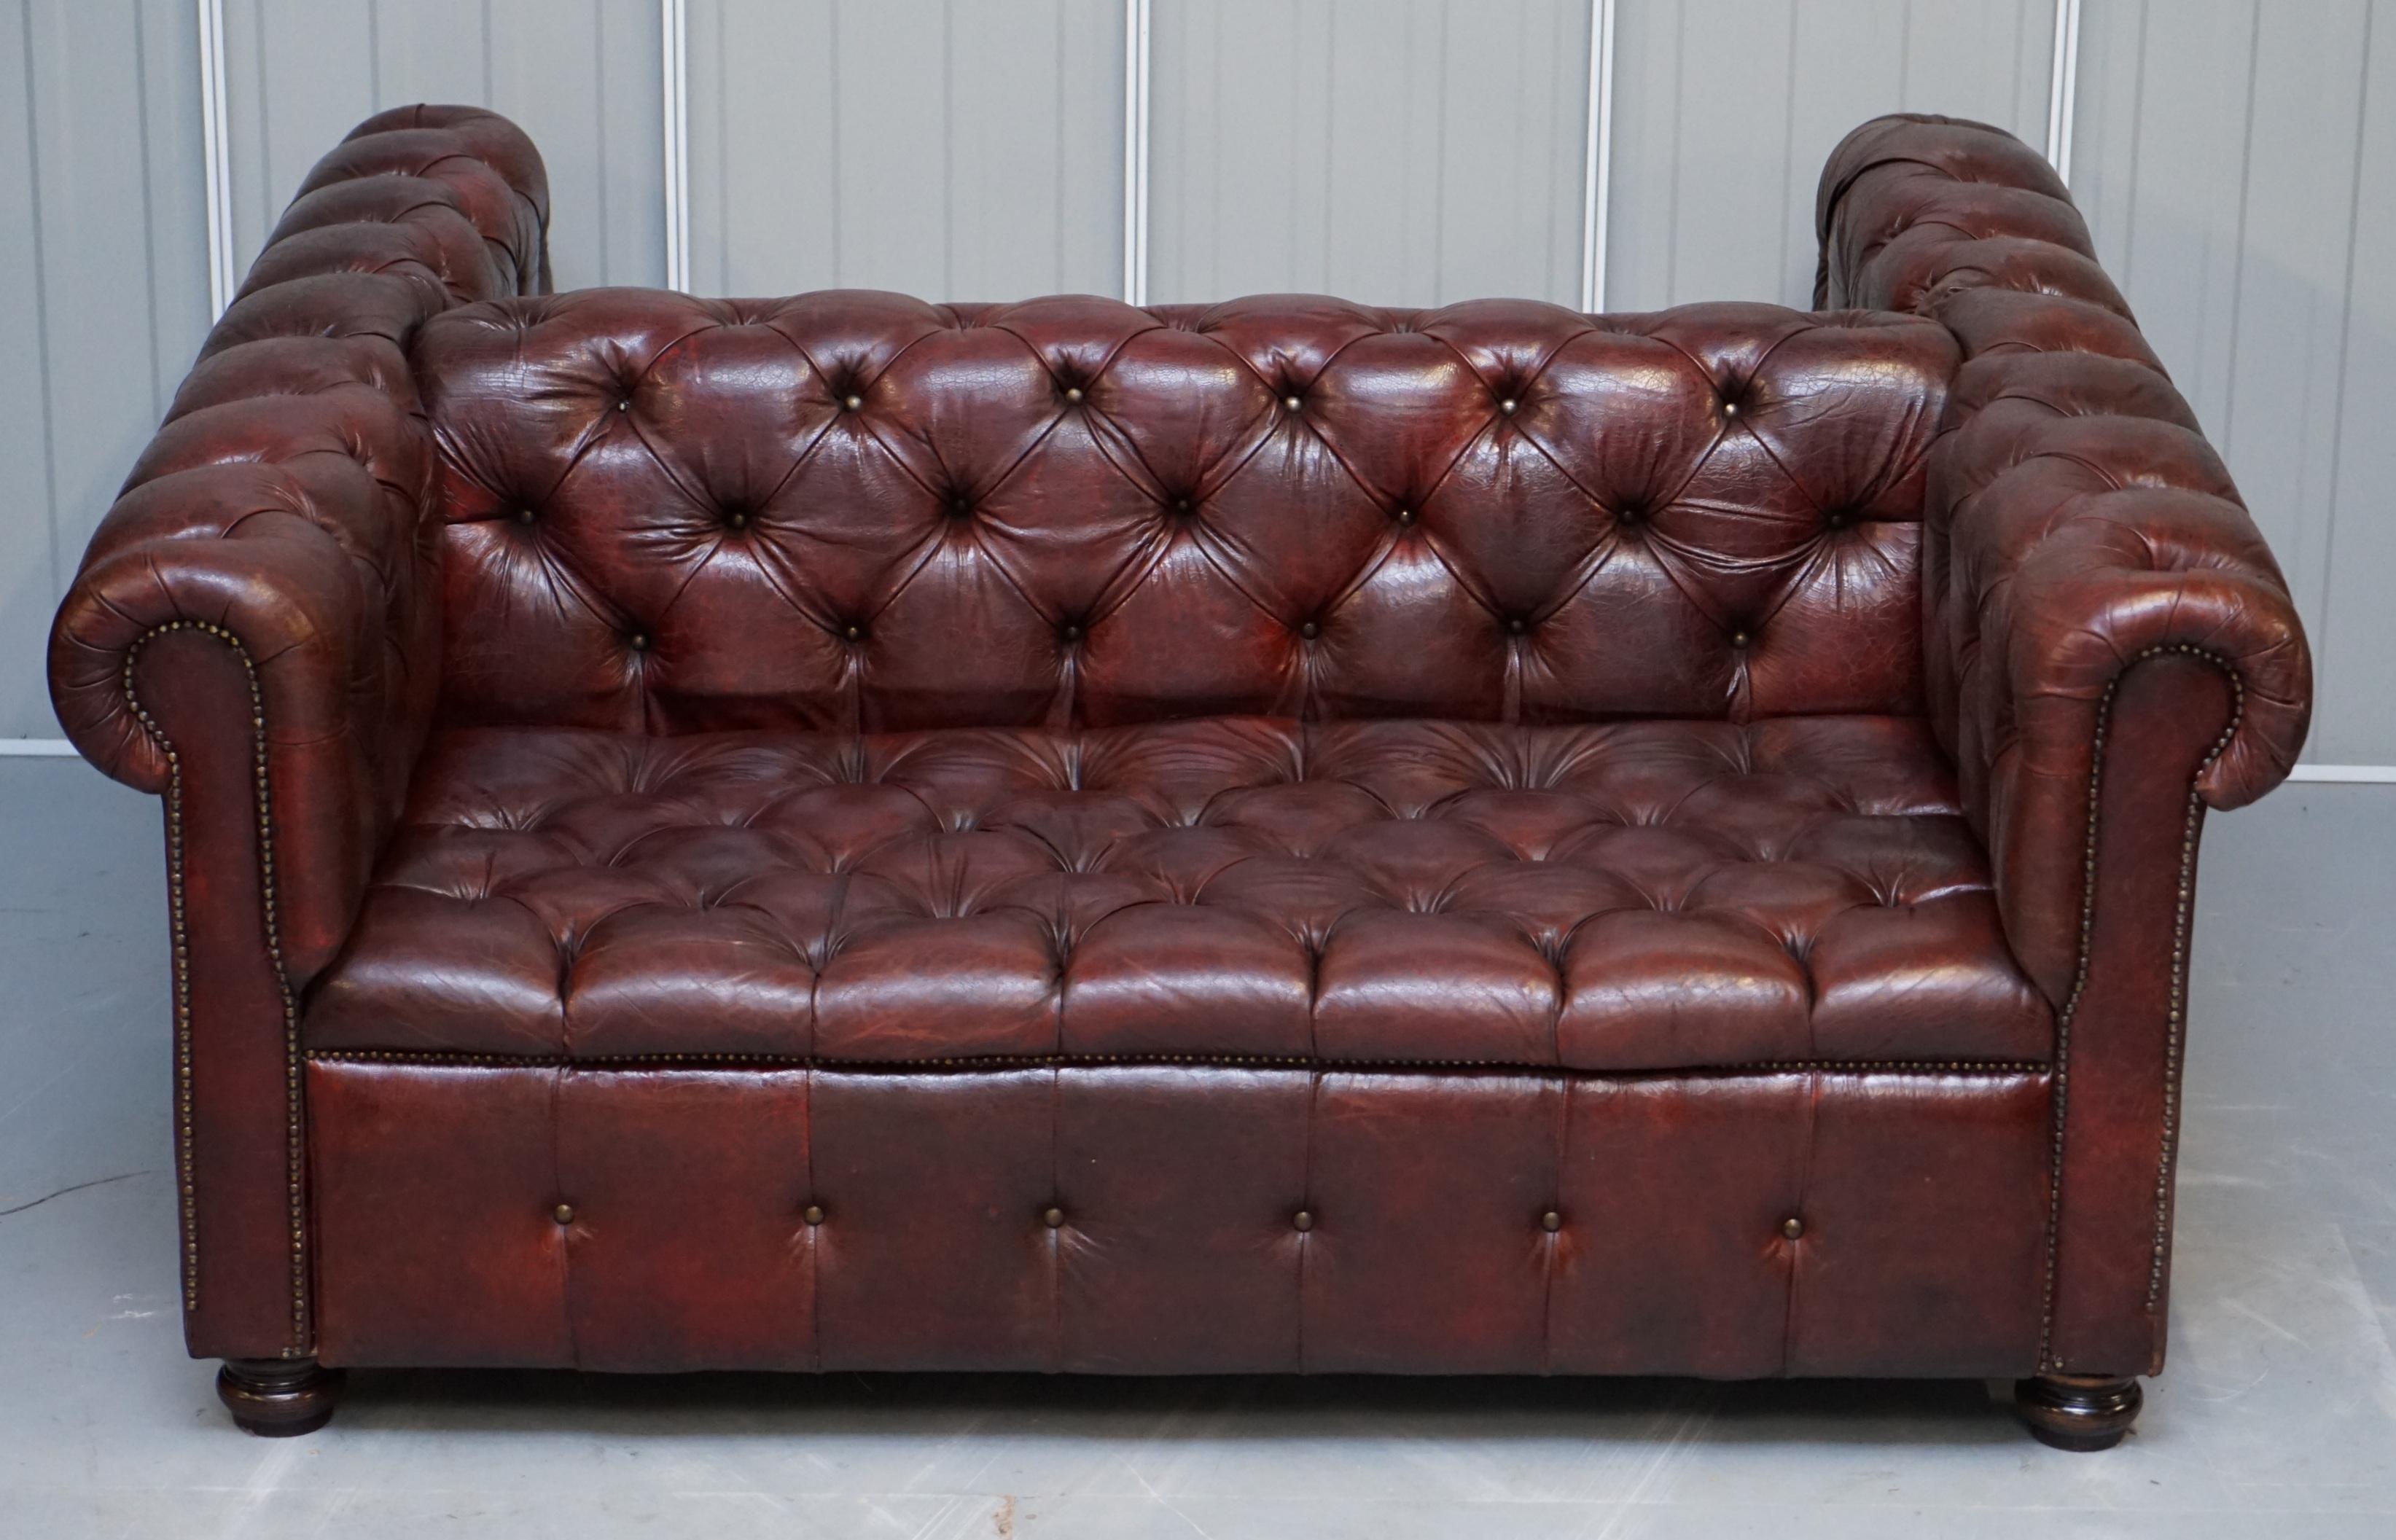 We are delighted to offer for sale this lovely handmade Chesterfield Oxblood brown vintage leather Chesterfield double sided club sofa

A very good looking piece, I have never seen or owned a double sided Chesterfield before, this is the first